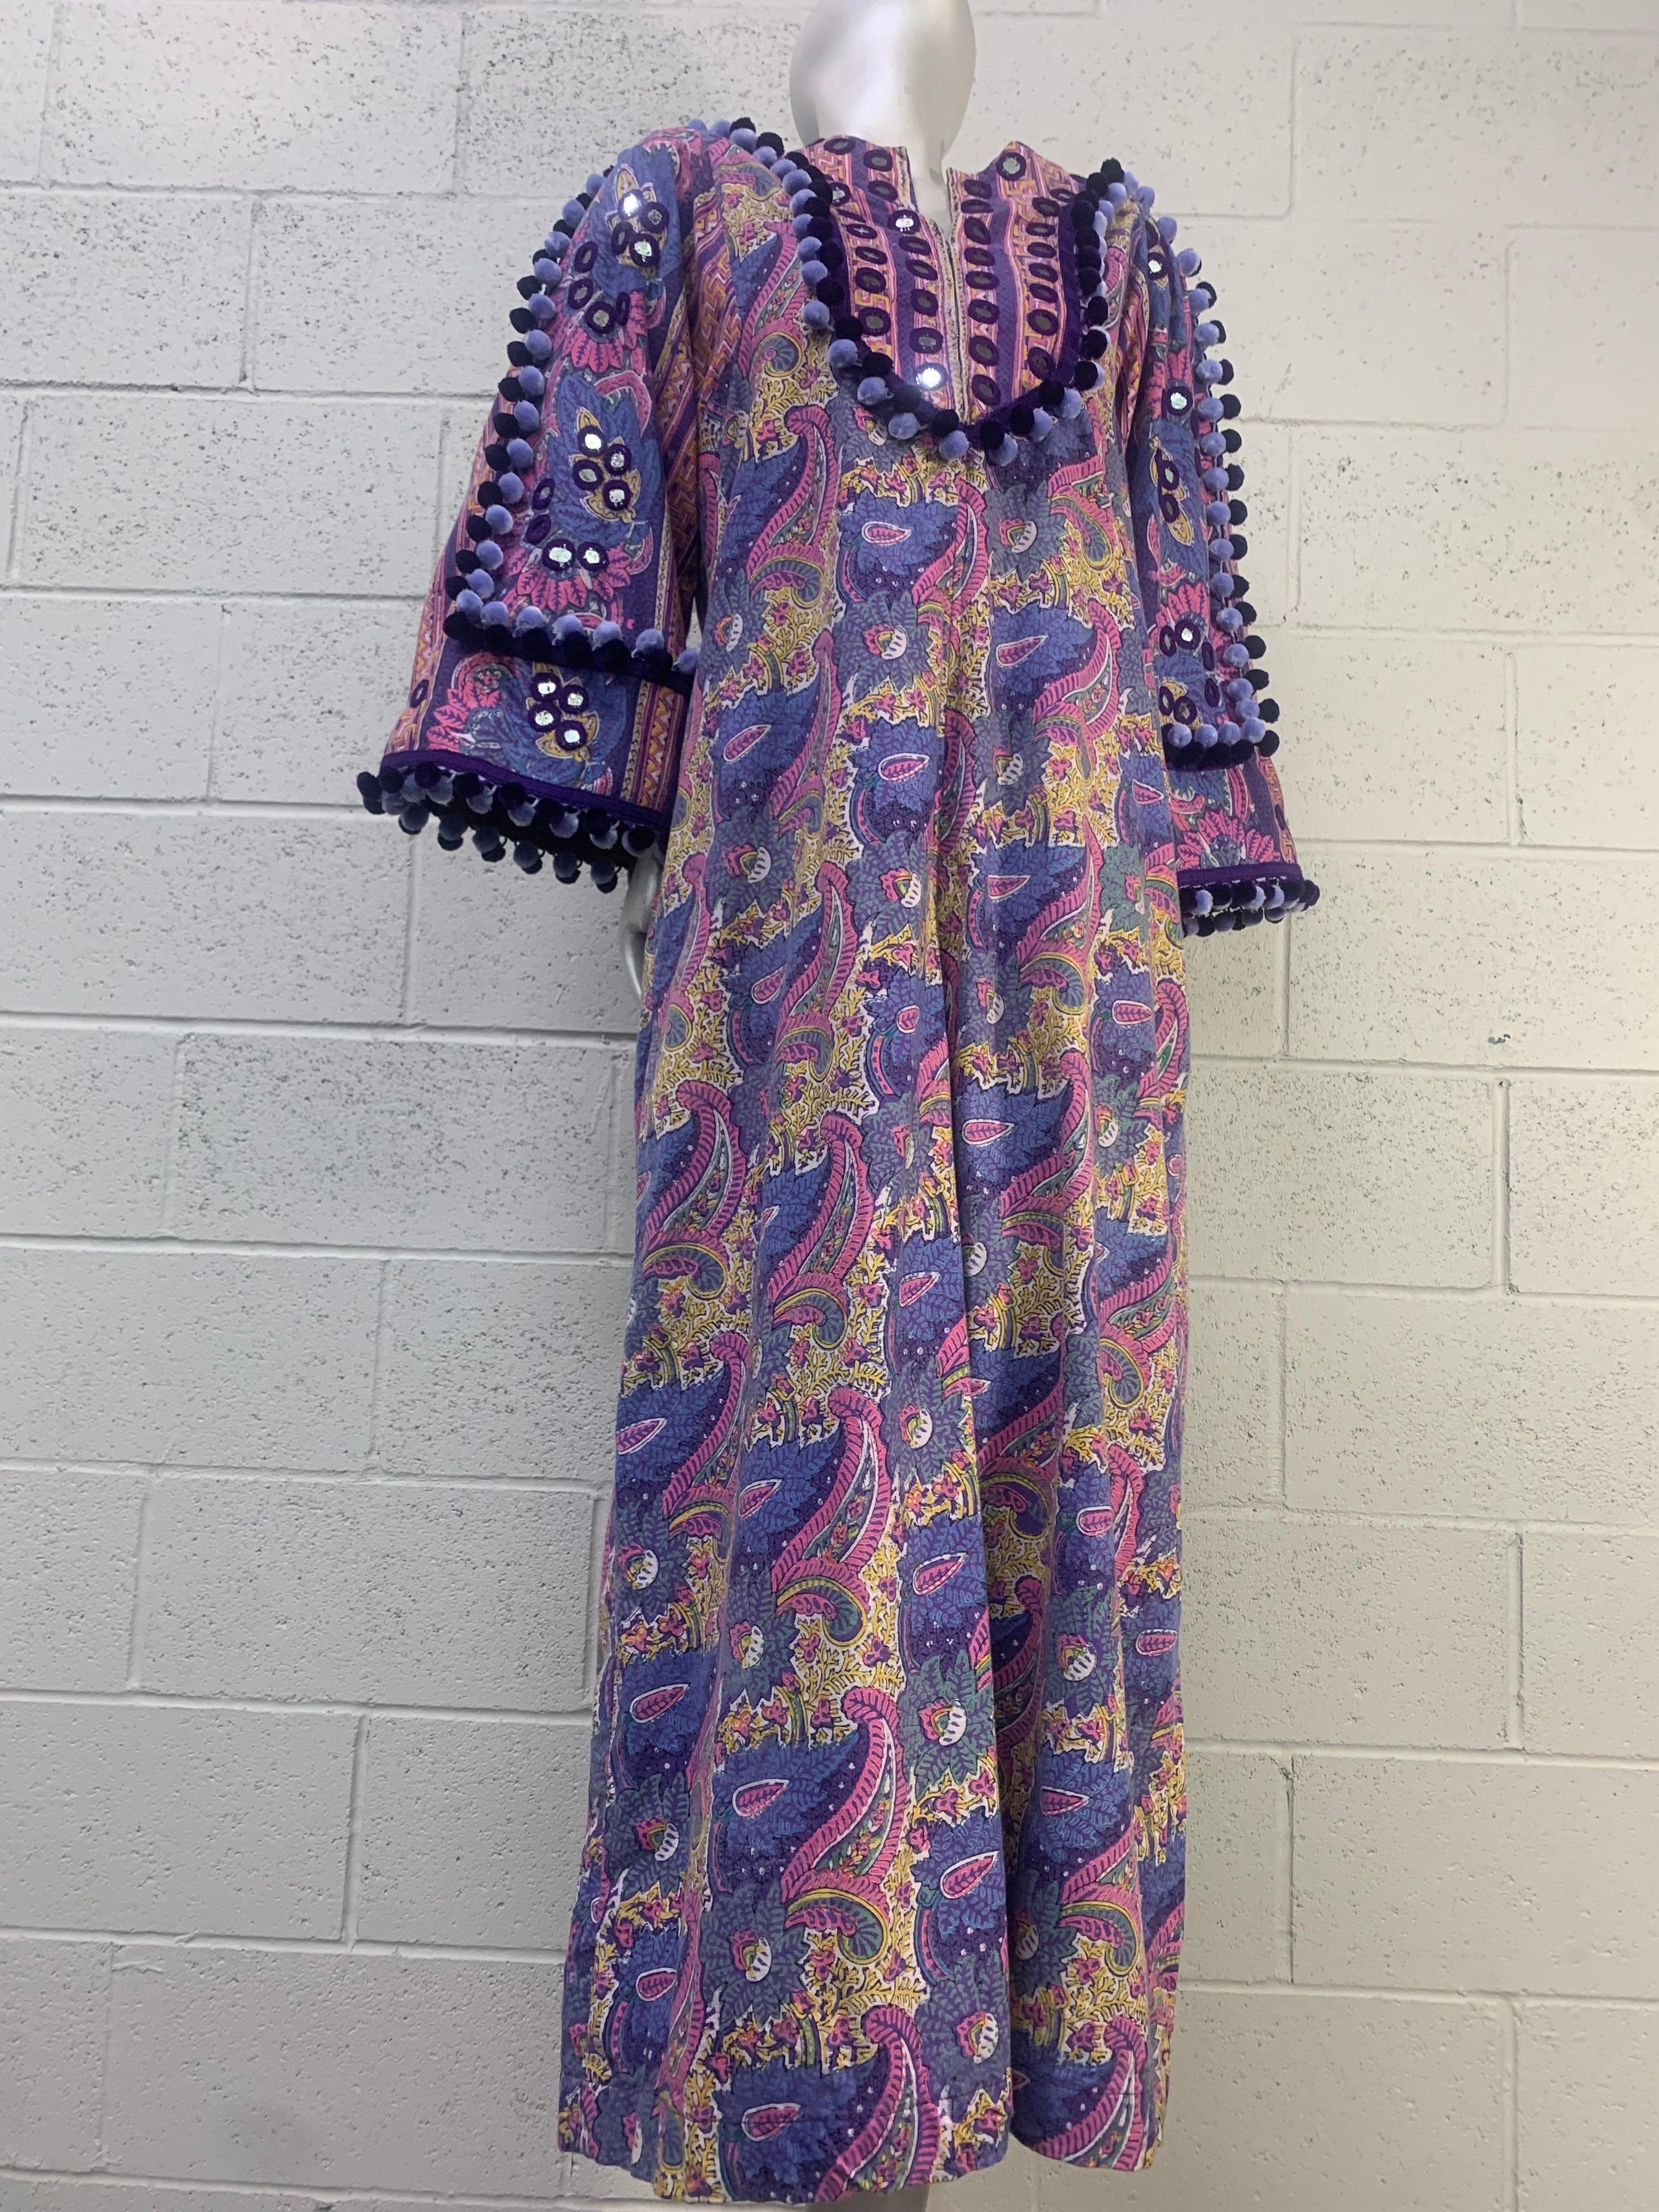 Torso Creations Embellished 1960s Ramona Rull Hostess Gown w Mirrors and Pom Pom Trim: Center mirrored bib front and sleeves are further embellished with purple and lavender pompom trim for added structure and DRAMA! Center zip front and side slit